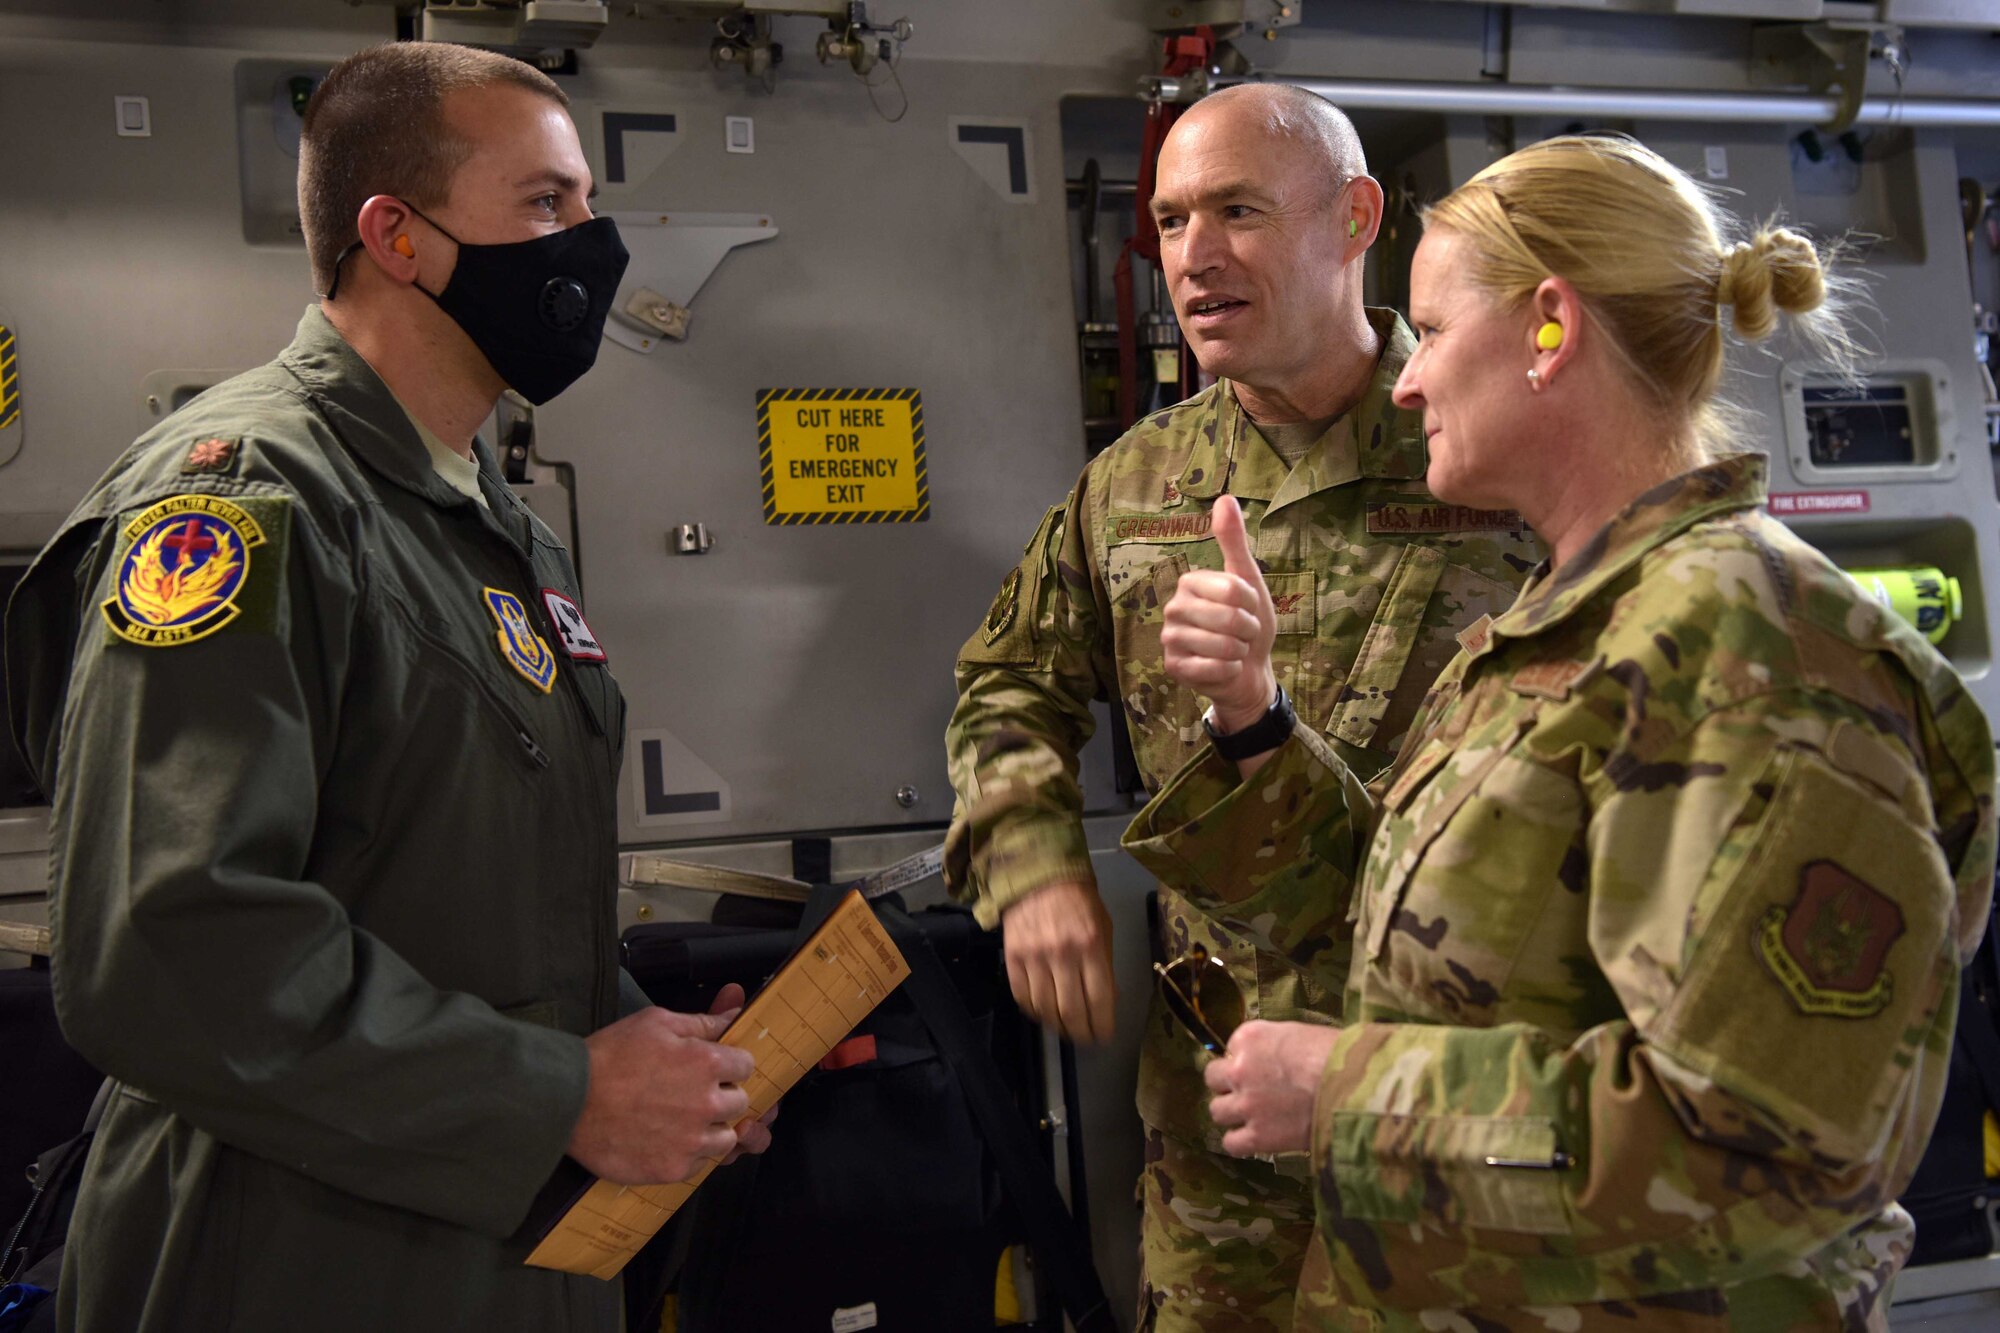 Major Avram Aaron Brammostyn, 944th Aeromedical Staging Squadron flight surgeon, checks in with the 944th Fighter Wing Commander, Col. James Greenwald, and the 944th FW Command Chief, Chief Master Sgt. Catherine Buchanan, before his takes off in support of the COVID-19 pandemic at Luke Air Force Base, Ariz., April 5, 2020. This deployment is part of a larger mobilization package of more than 120 doctors, nurses and respiratory technicians Air Force Reserve units across the nation provided over the past 48 hours in support of the COVID-19 response to take care of Americans.